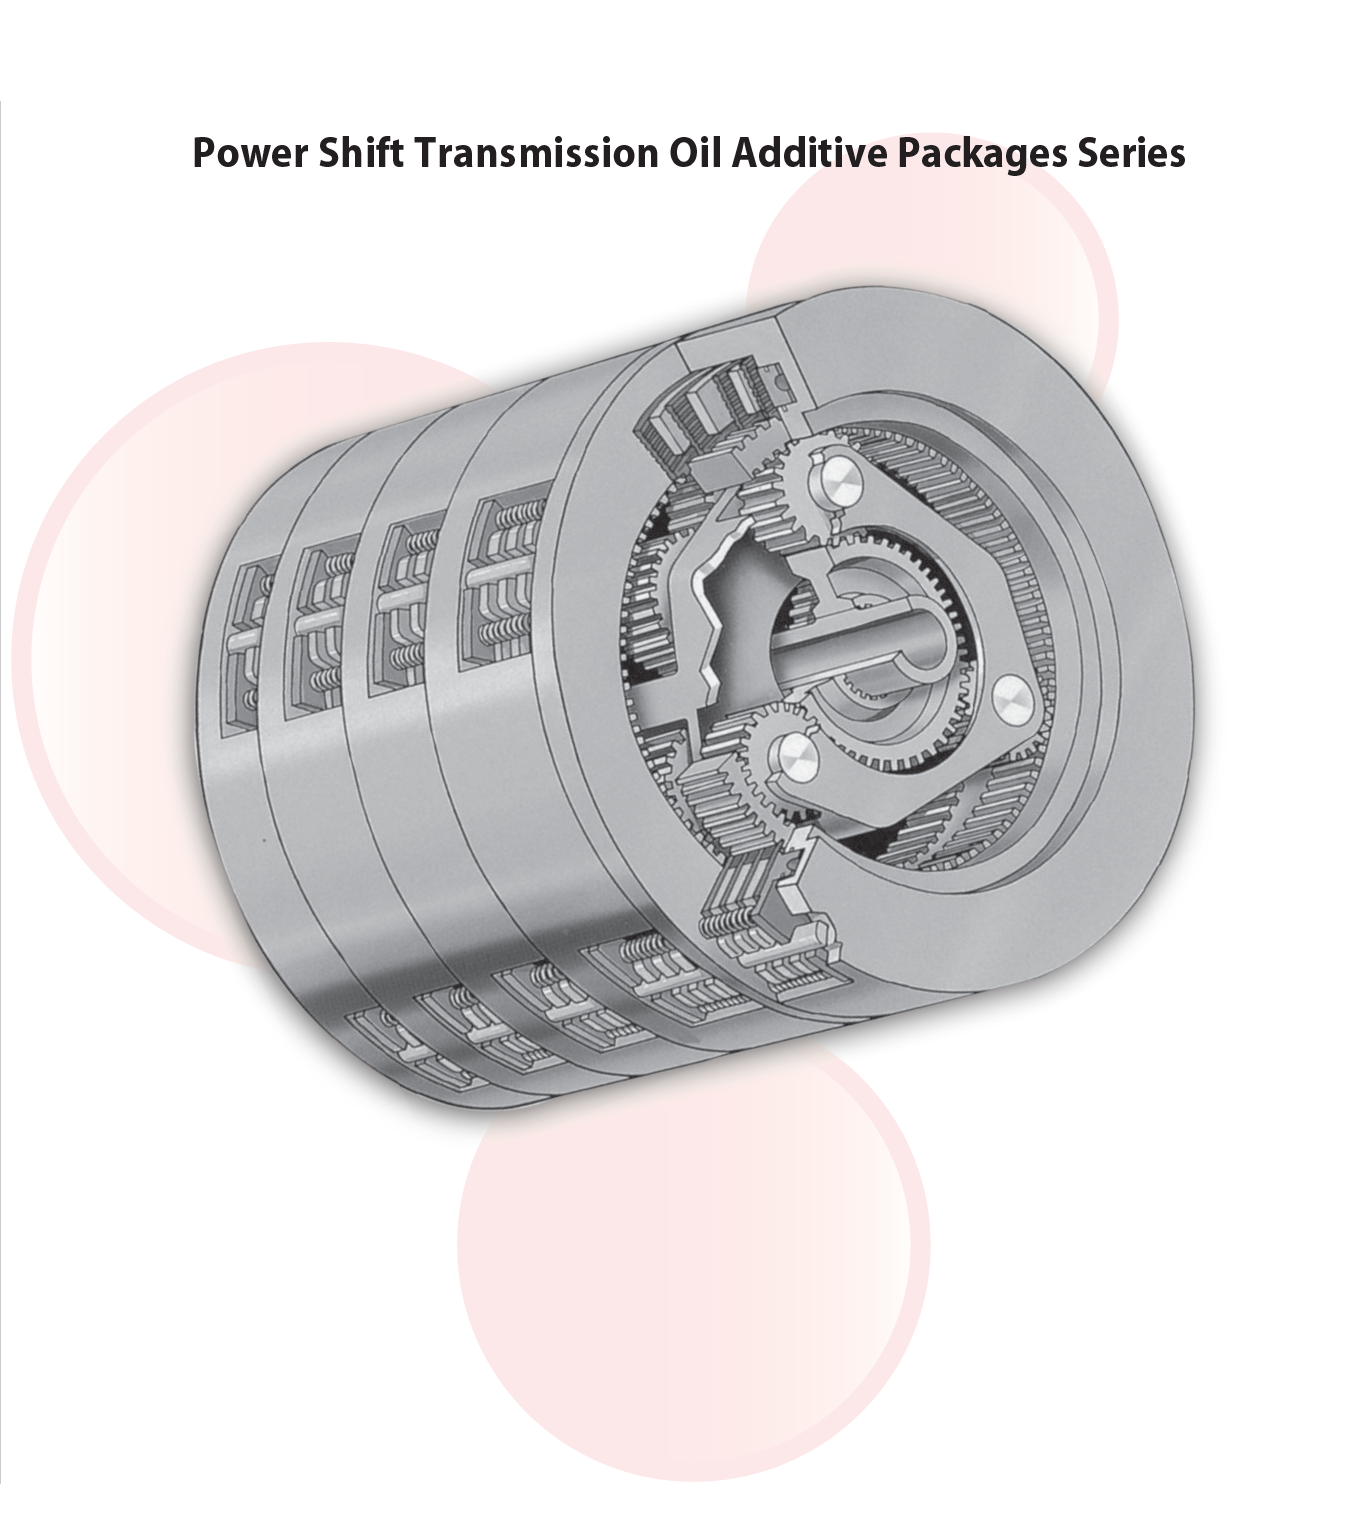 Power Shift Transmission Oil Additive Packages Series